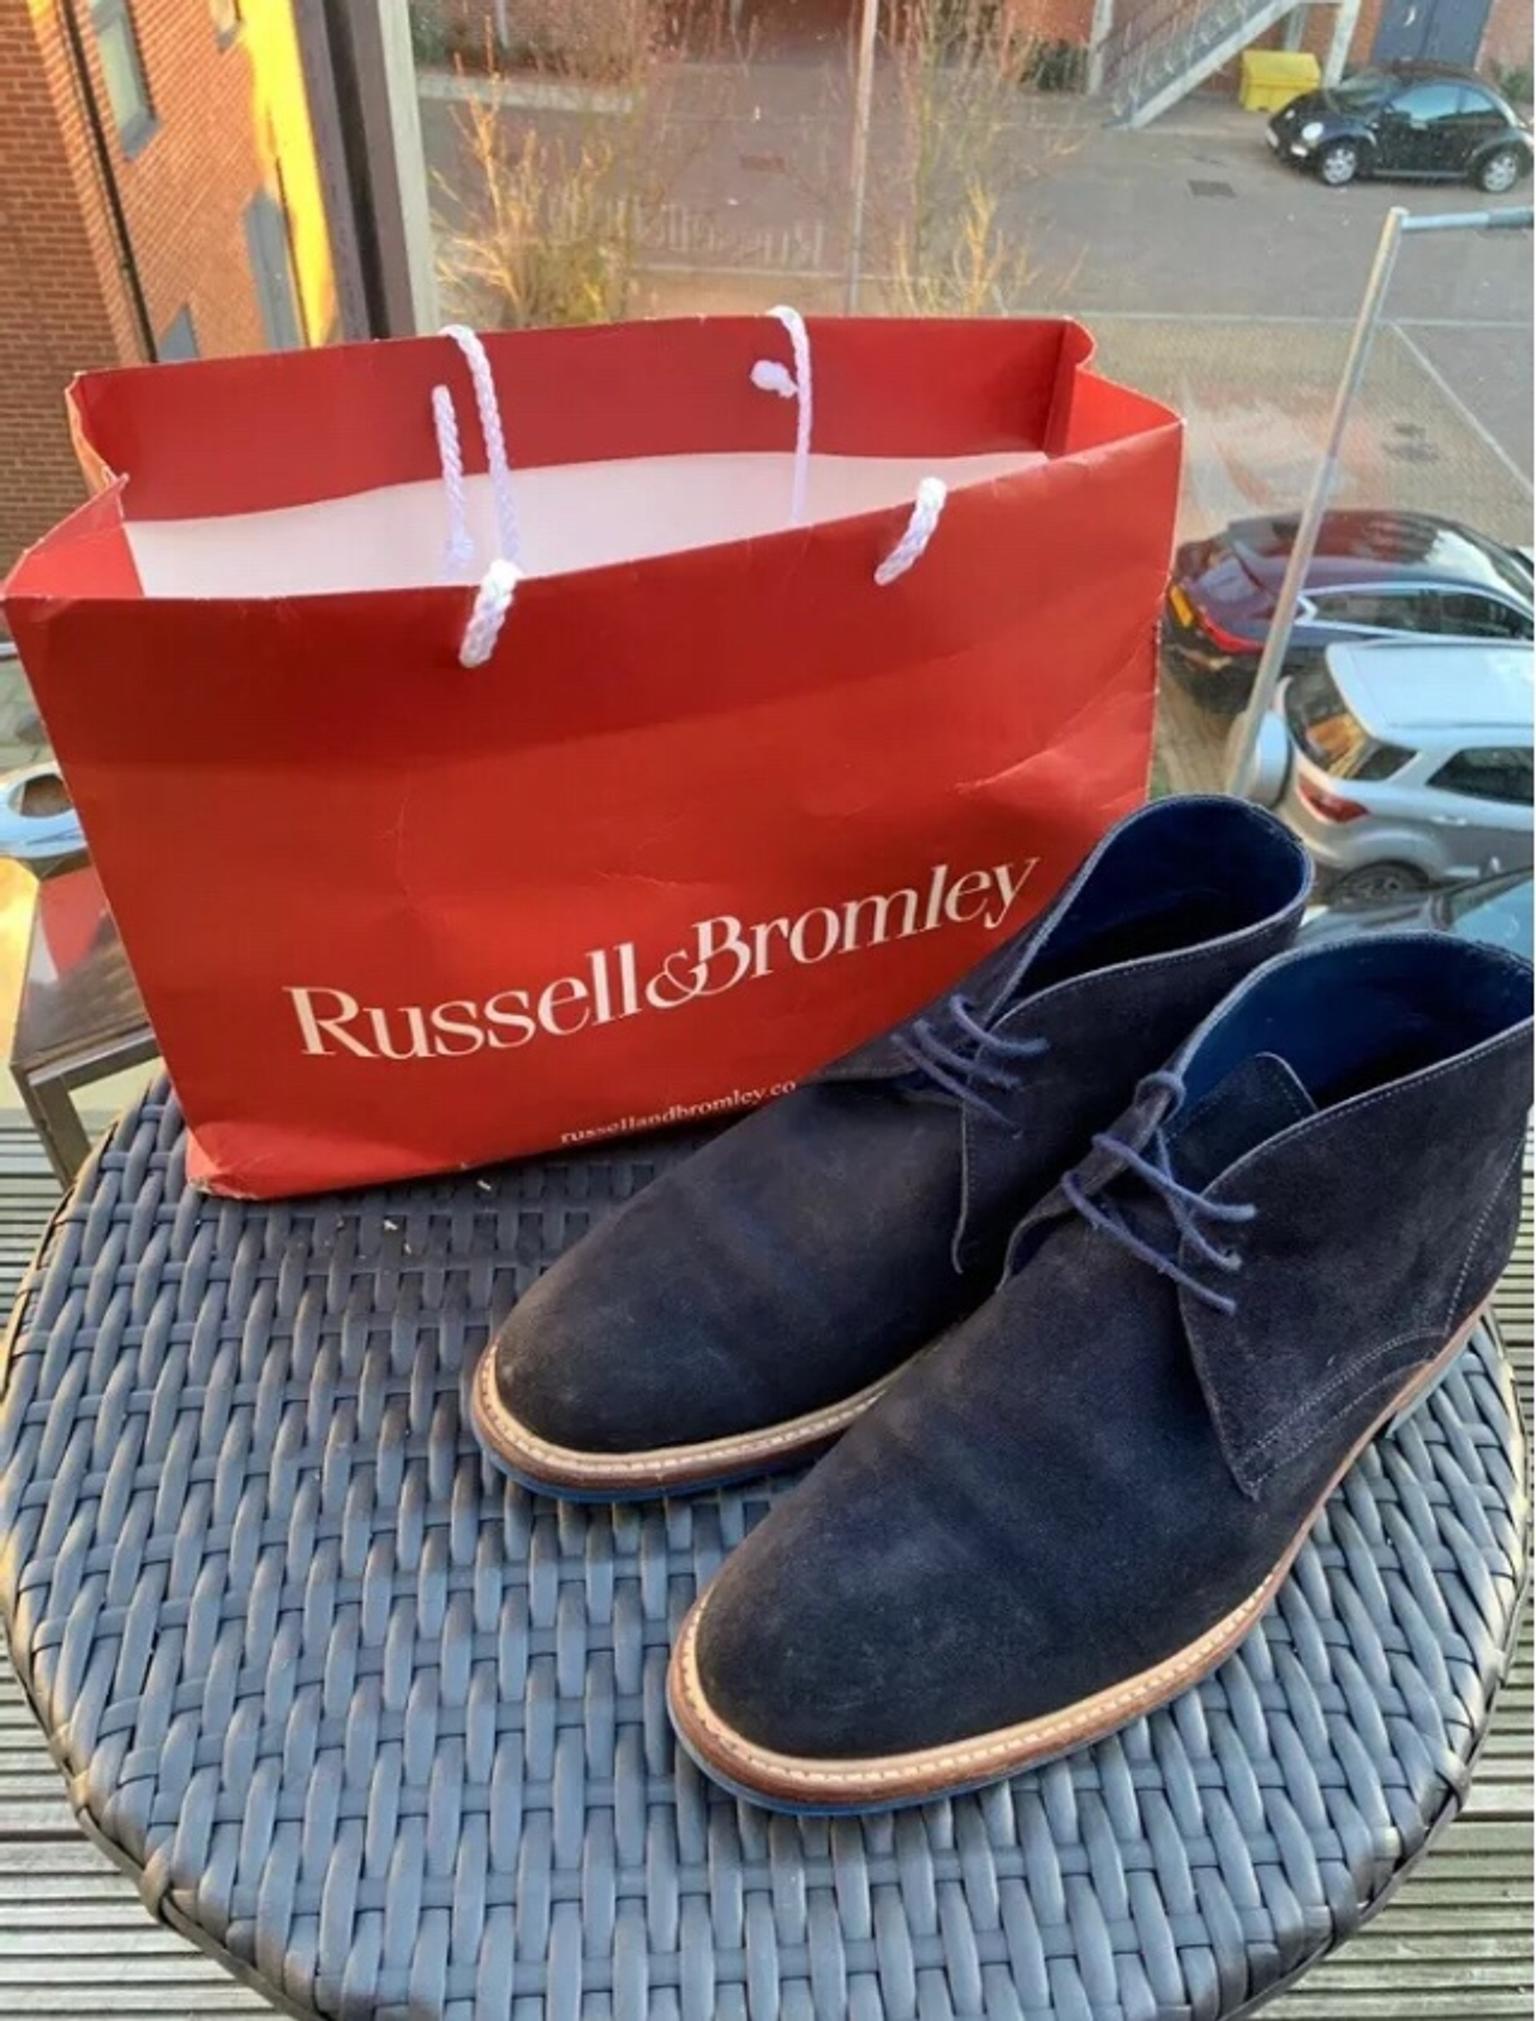 www russell bromley shoes